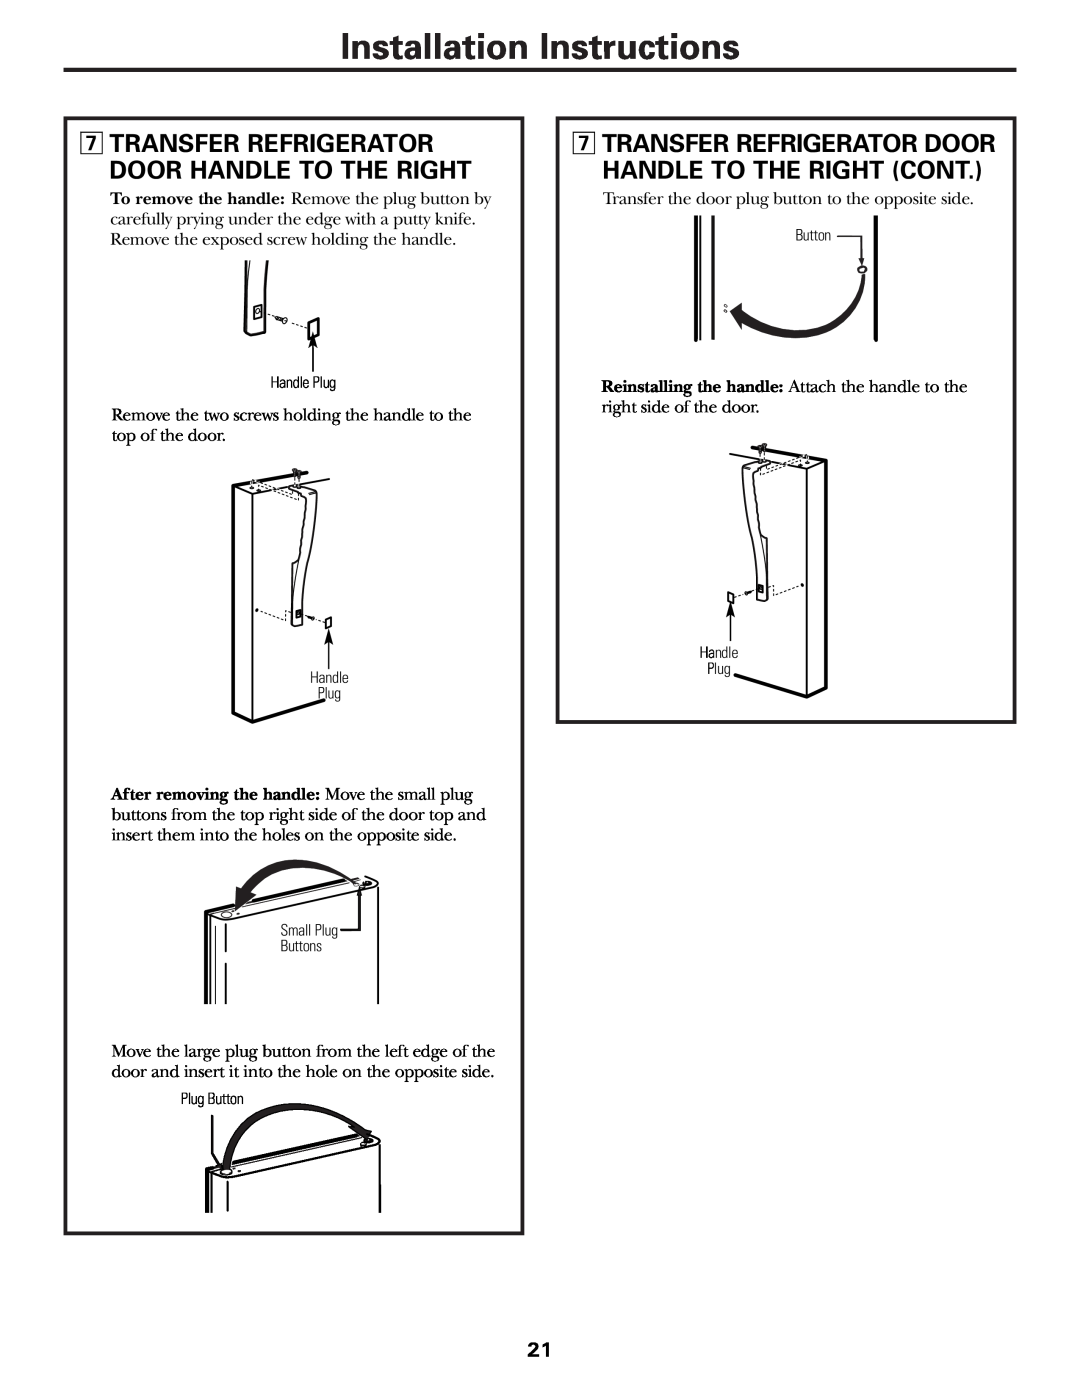 GE 197D3354P003 Transfer Refrigerator Door Handle To The Right Cont, Installation Instructions 